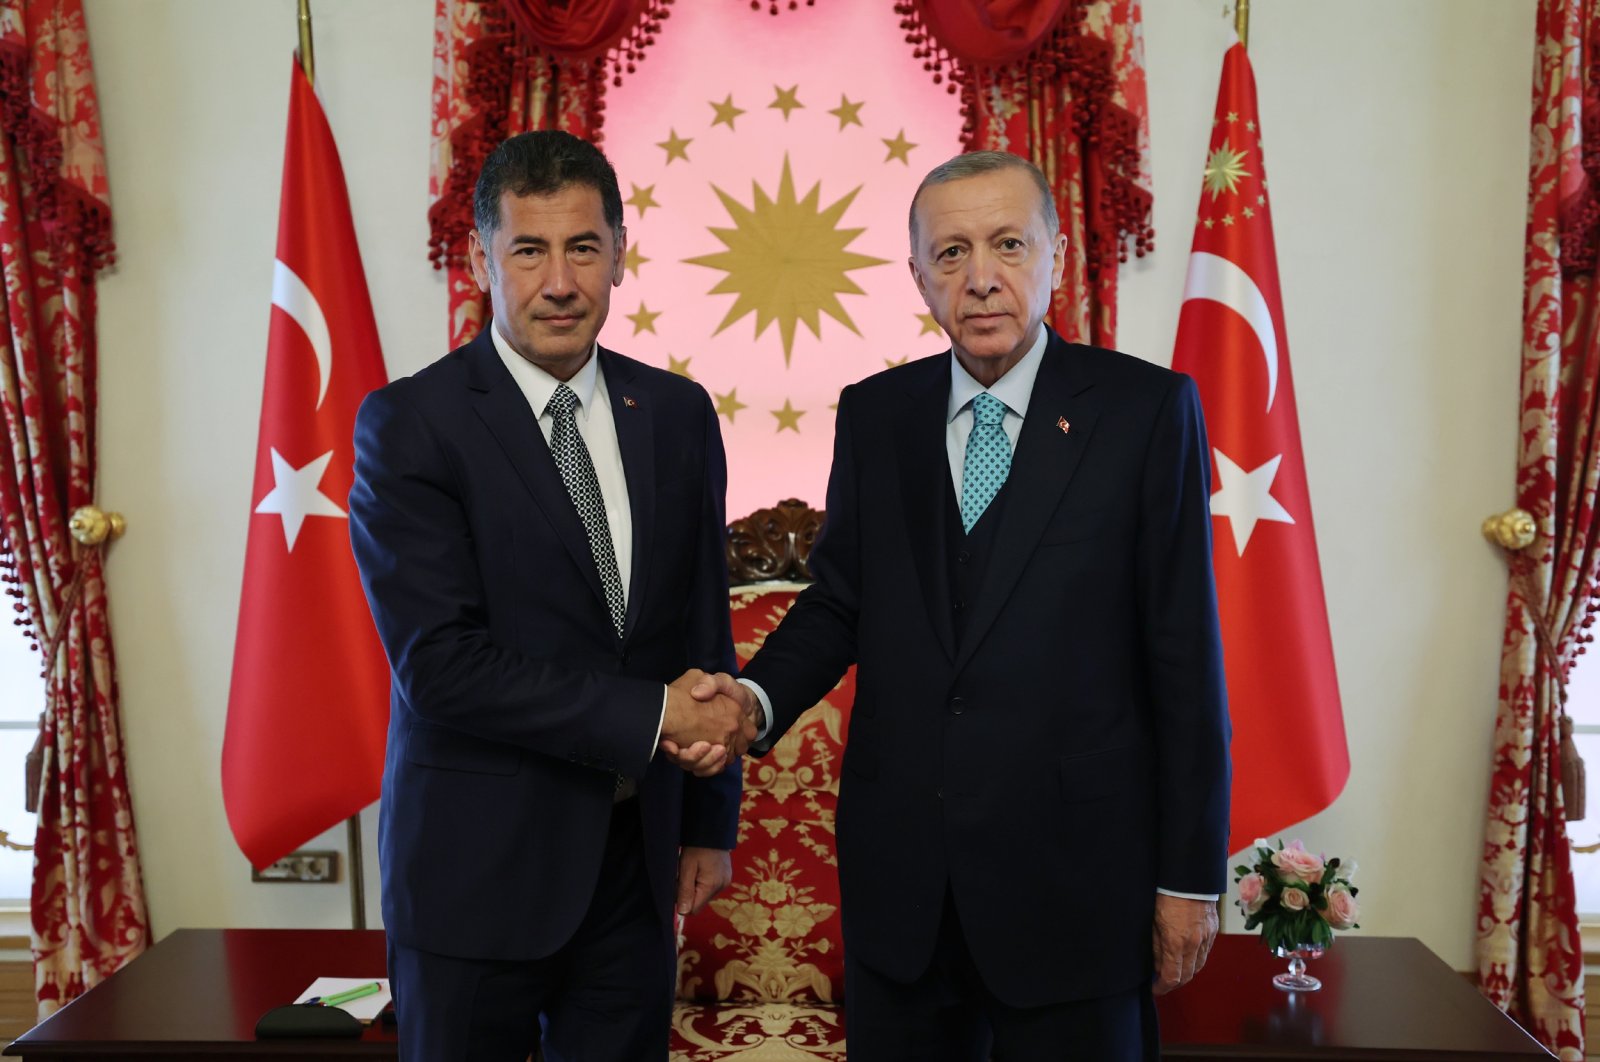 President Recep Tayyip Erdoğan shakes hands with ATA Alliance leader Sinan Oğan at Dolmabahçe Office in Istanbul, May 19, 2023. (DHA Photo)